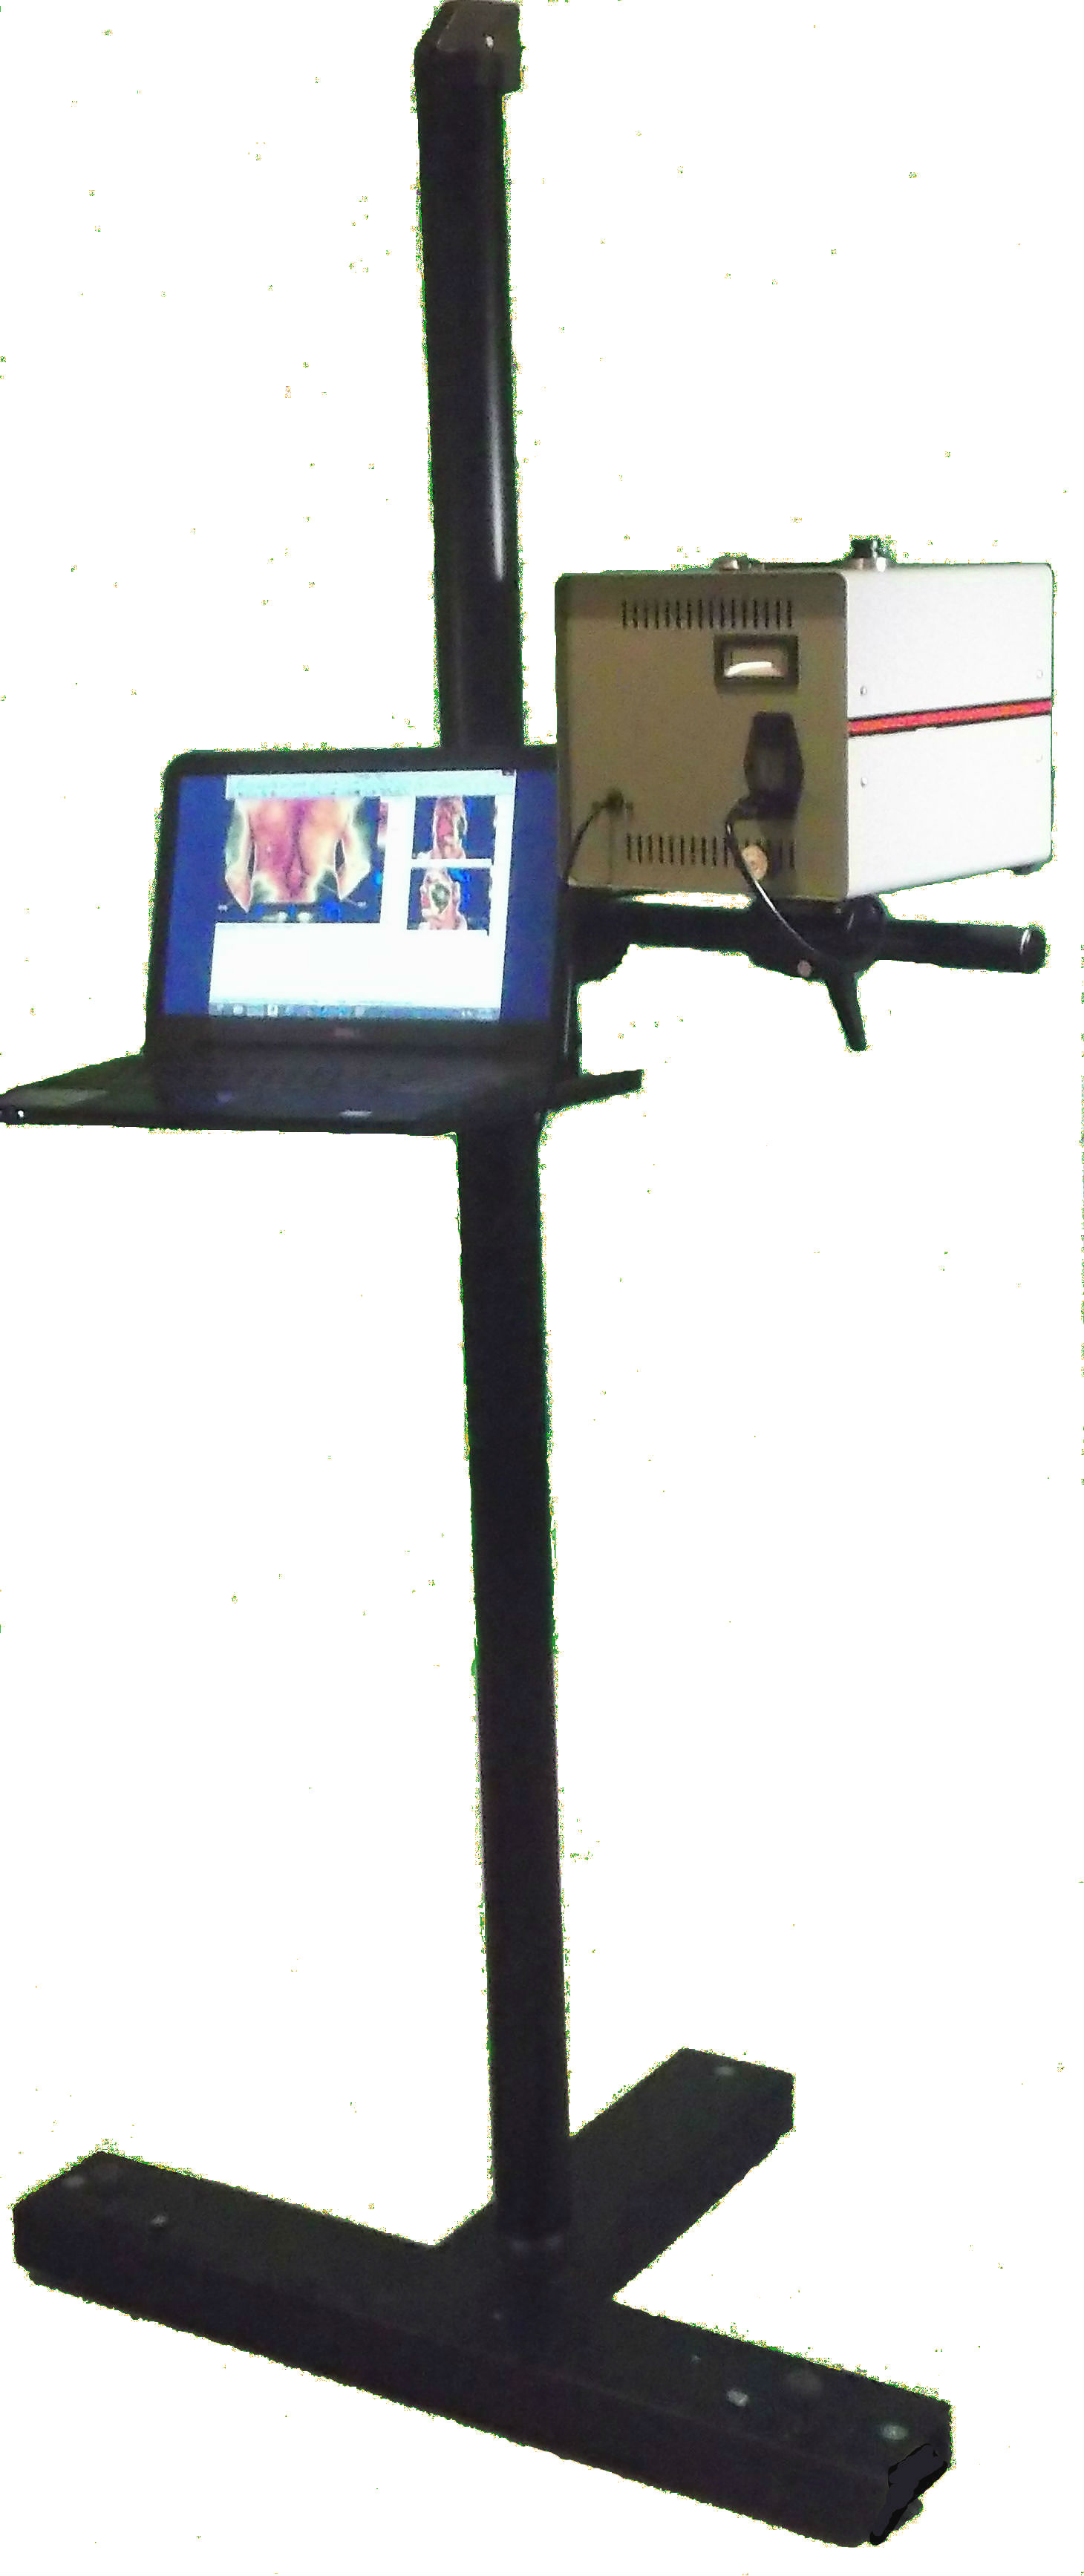 Tiger4 Pro on counterbalanced stand